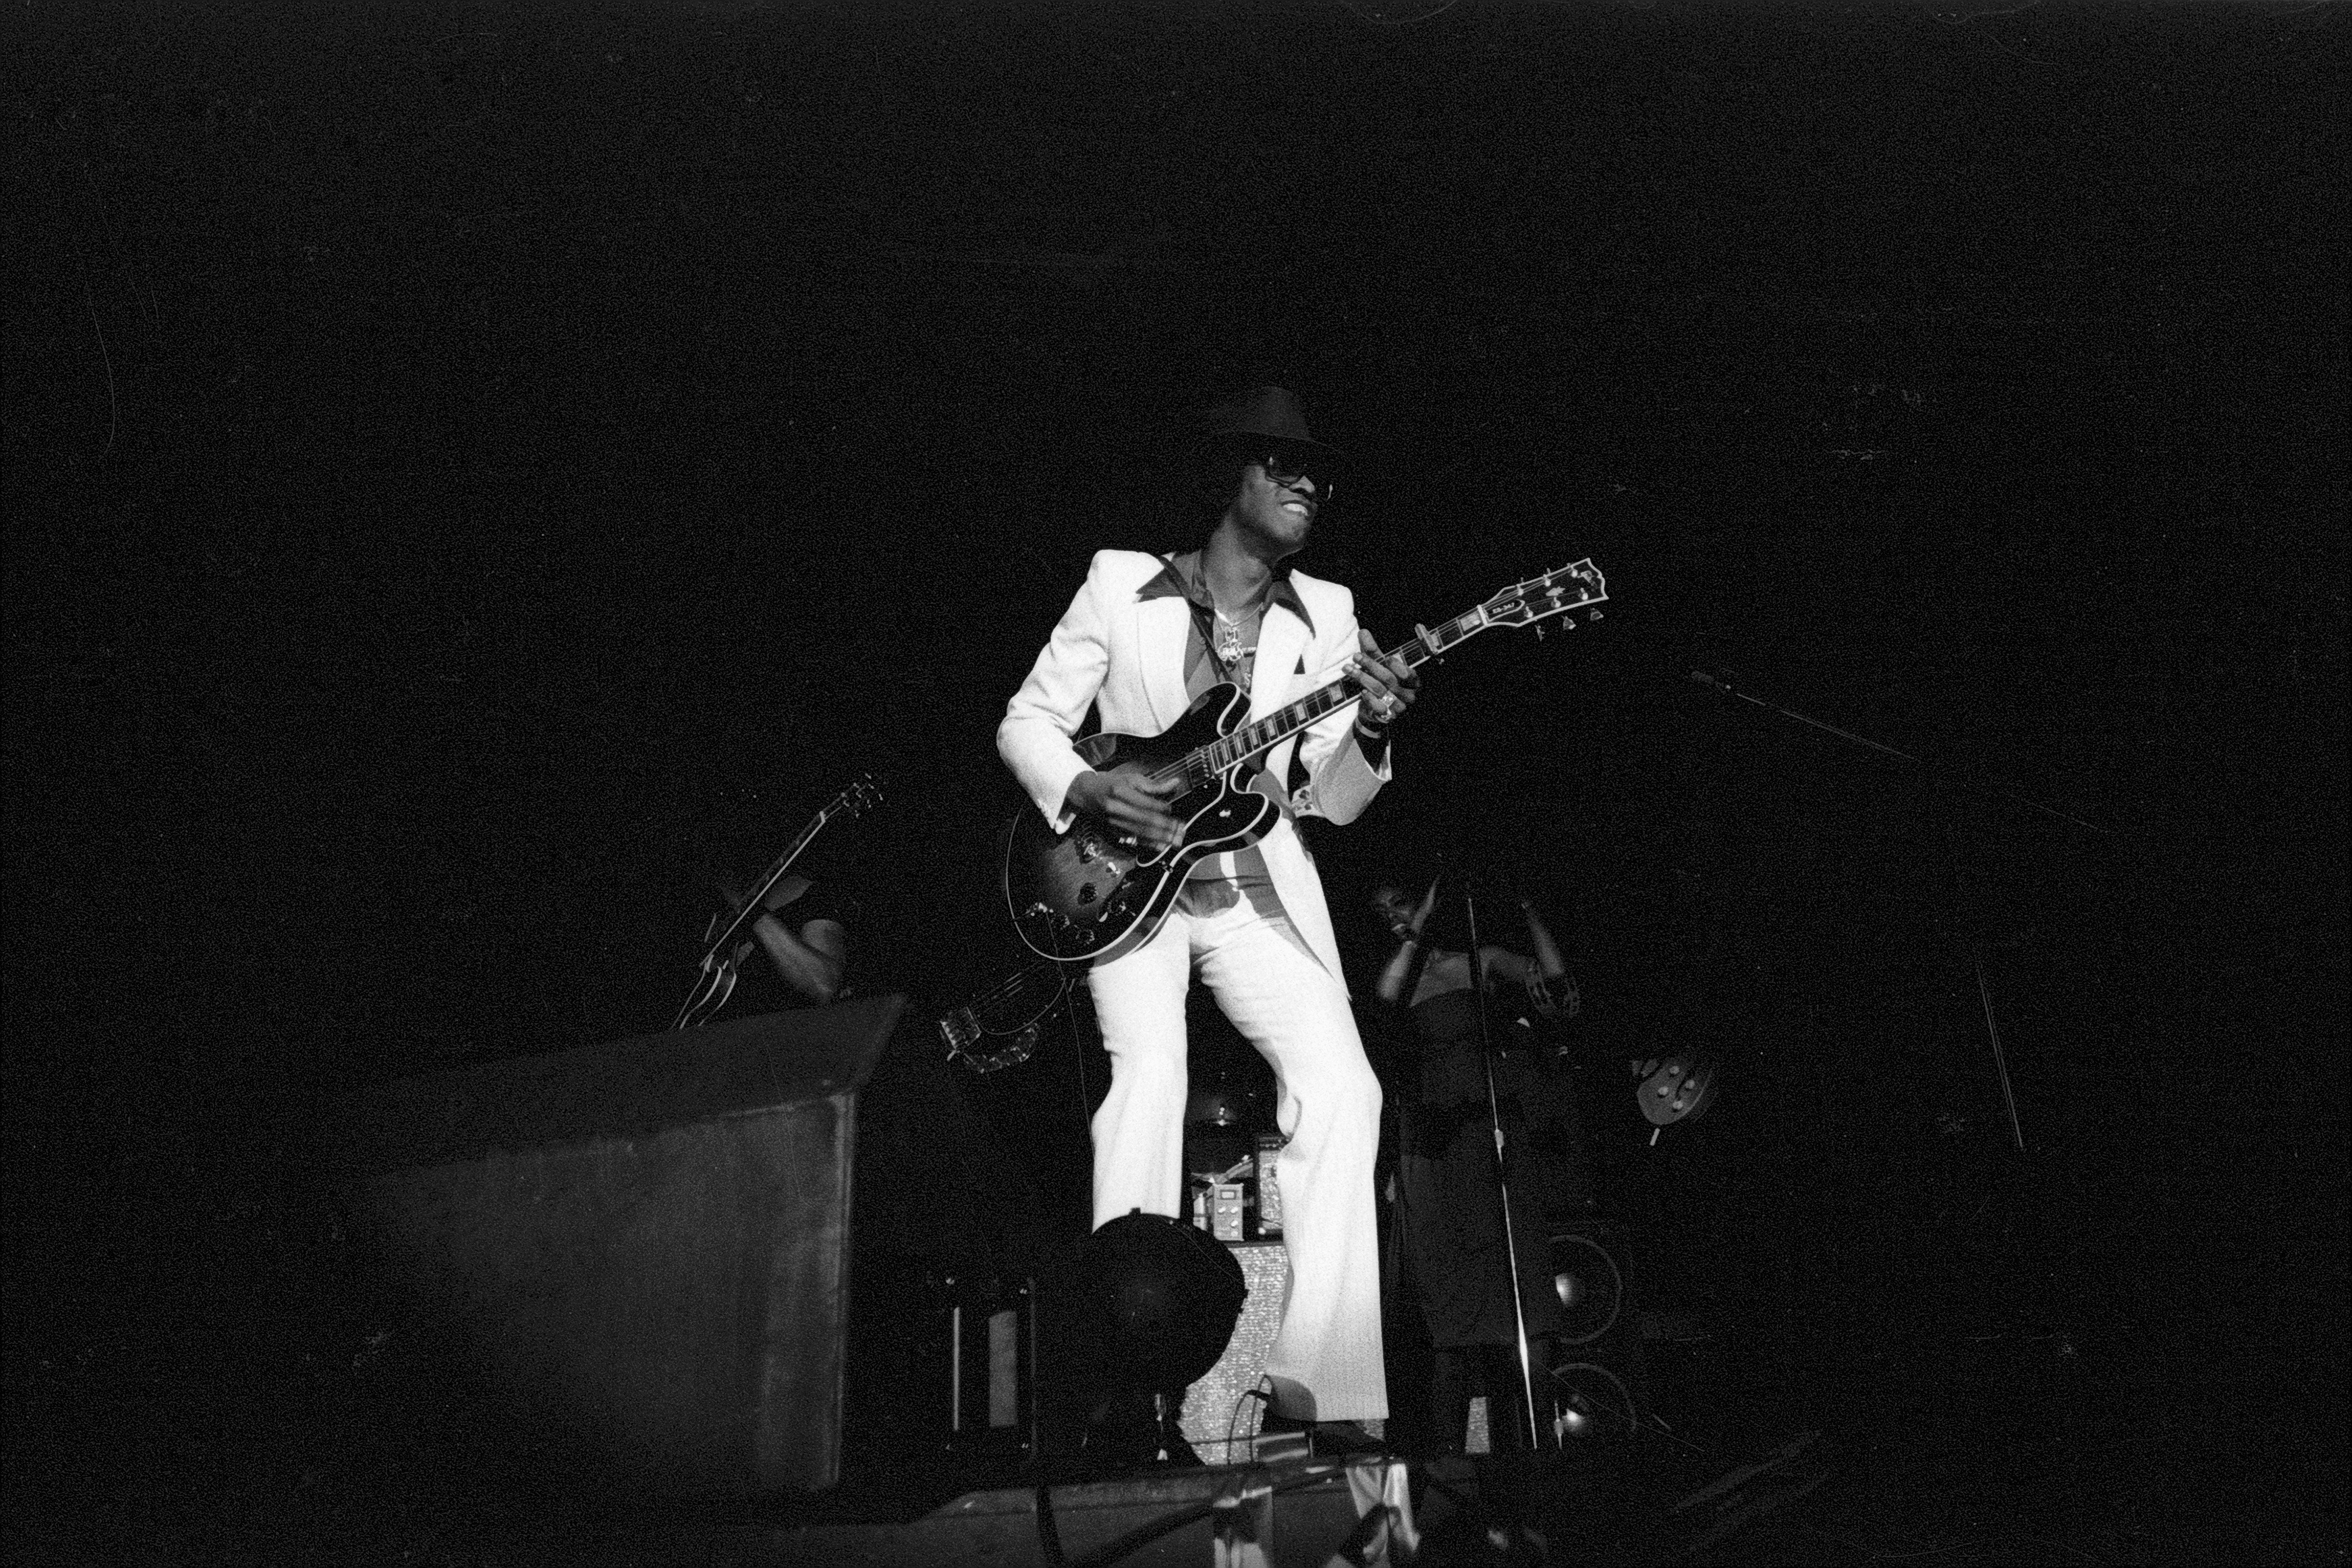 Johnny "Guitar "Watson, American blues, soul, and funk musician and singer-songwriter on stage in Berlin in June 1980 | Source: Getty Images